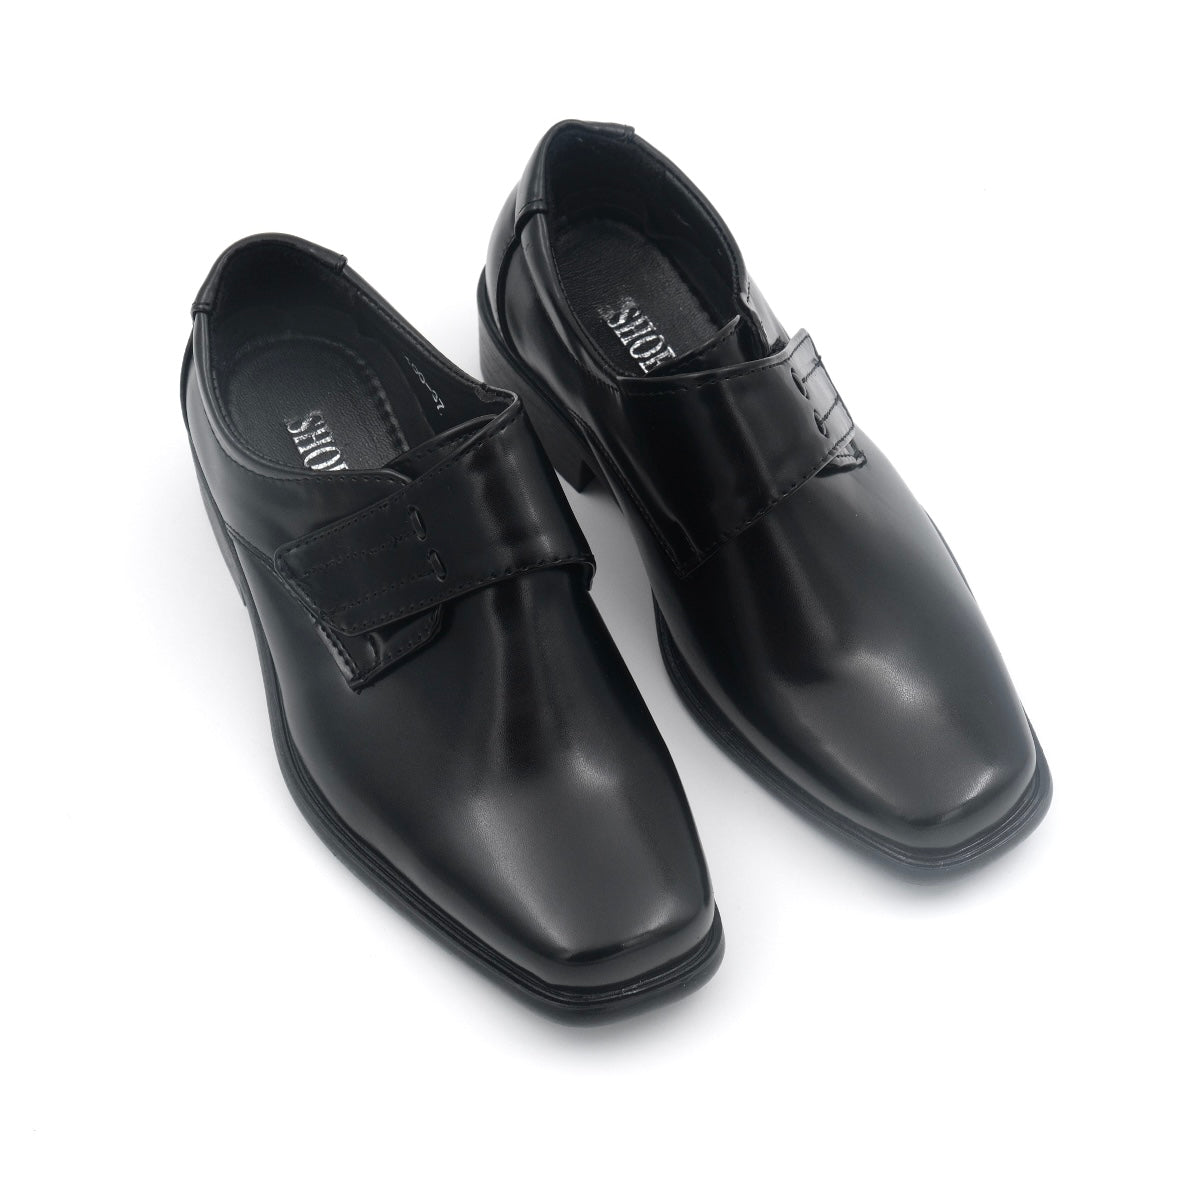 Owen 100-37 Black Leather Shoes for Small Kids